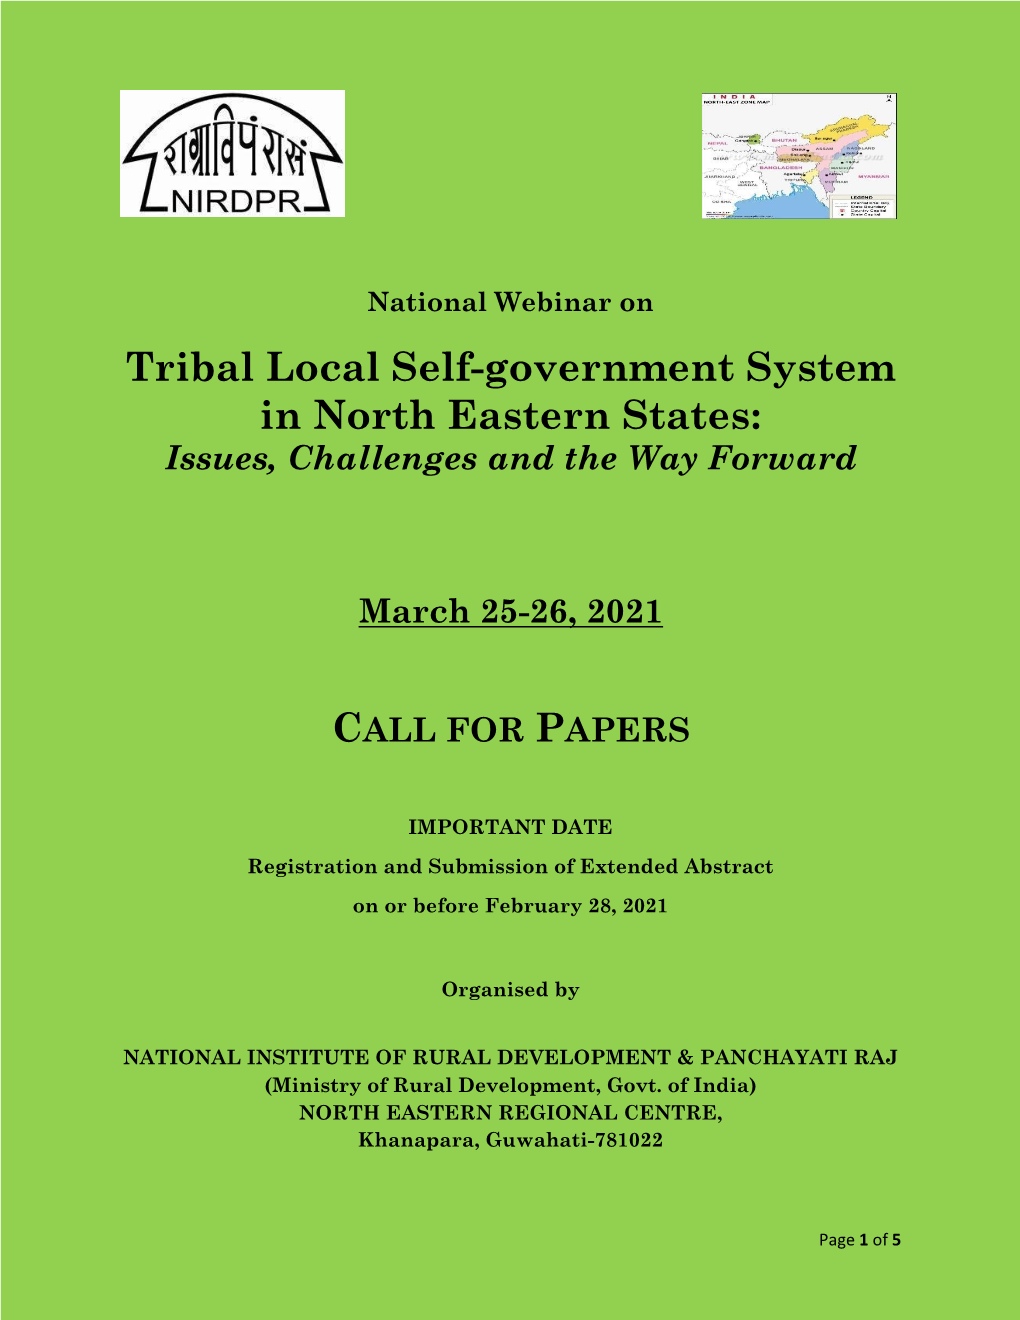 Tribal Local Self-Government System in North Eastern States: Issues, Challenges and the Way Forward